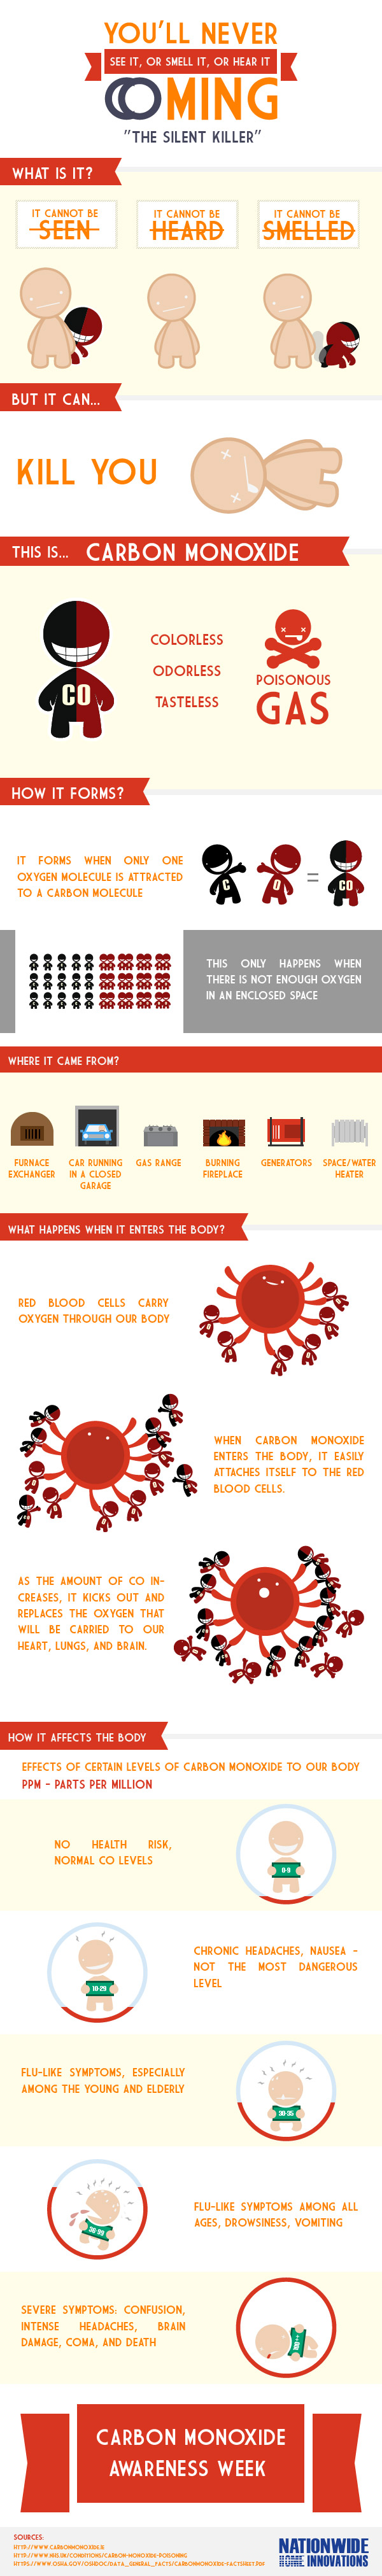 All You Need To Know About Carbon Monoxide The Silent Killer Visually 7592